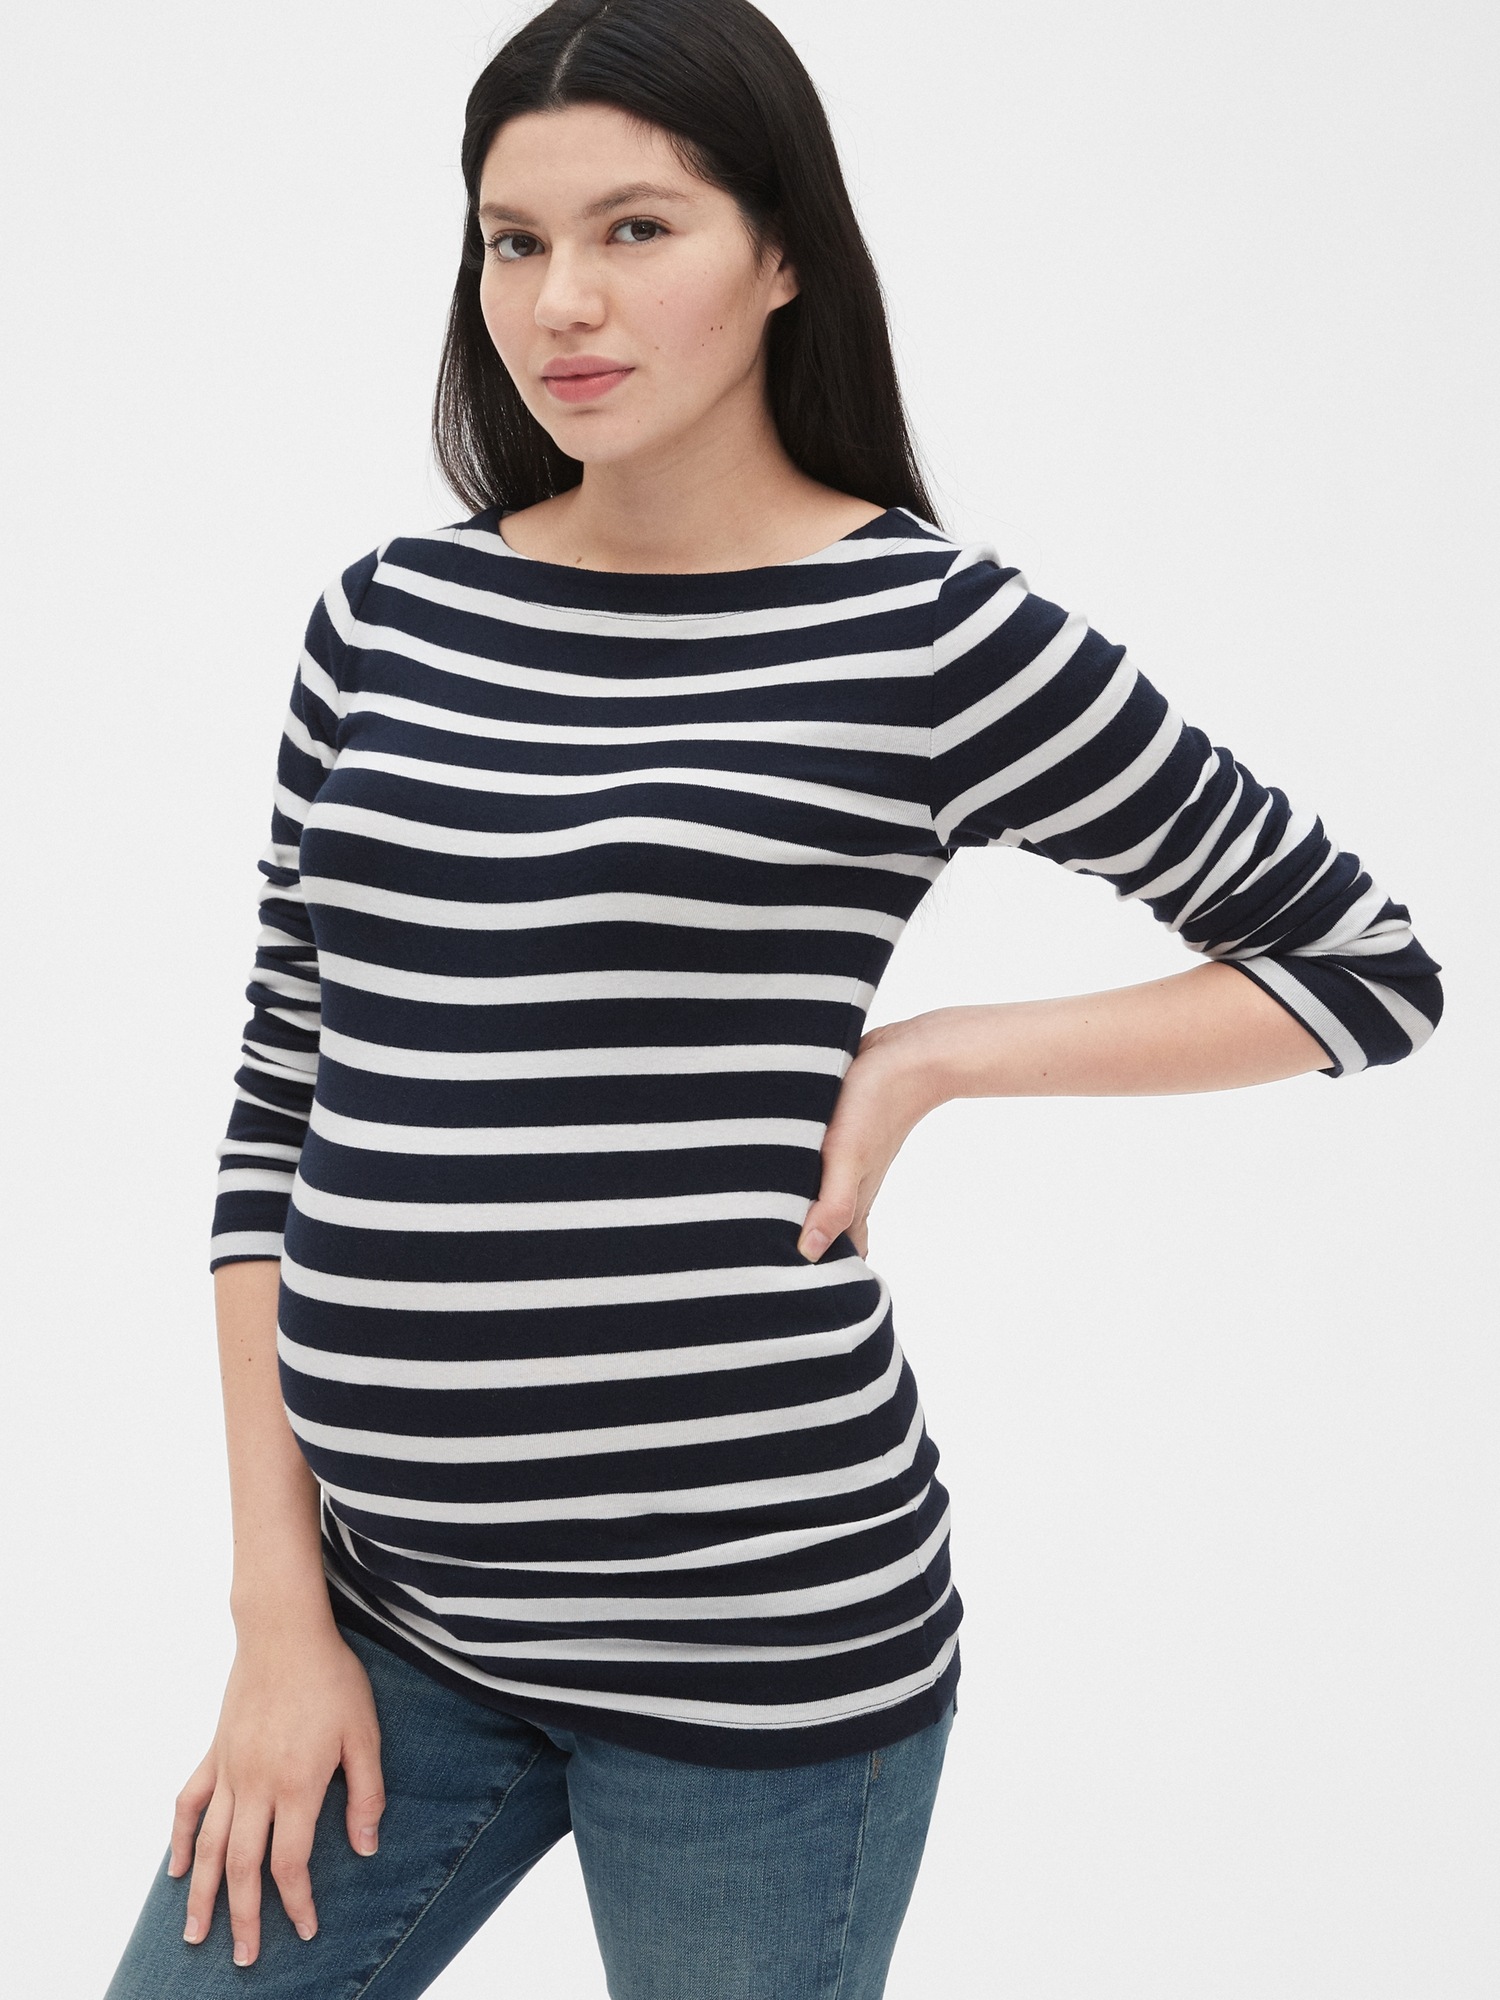 Gap Maternity White And Black Striped￼ Long Sleeve T-Shirt